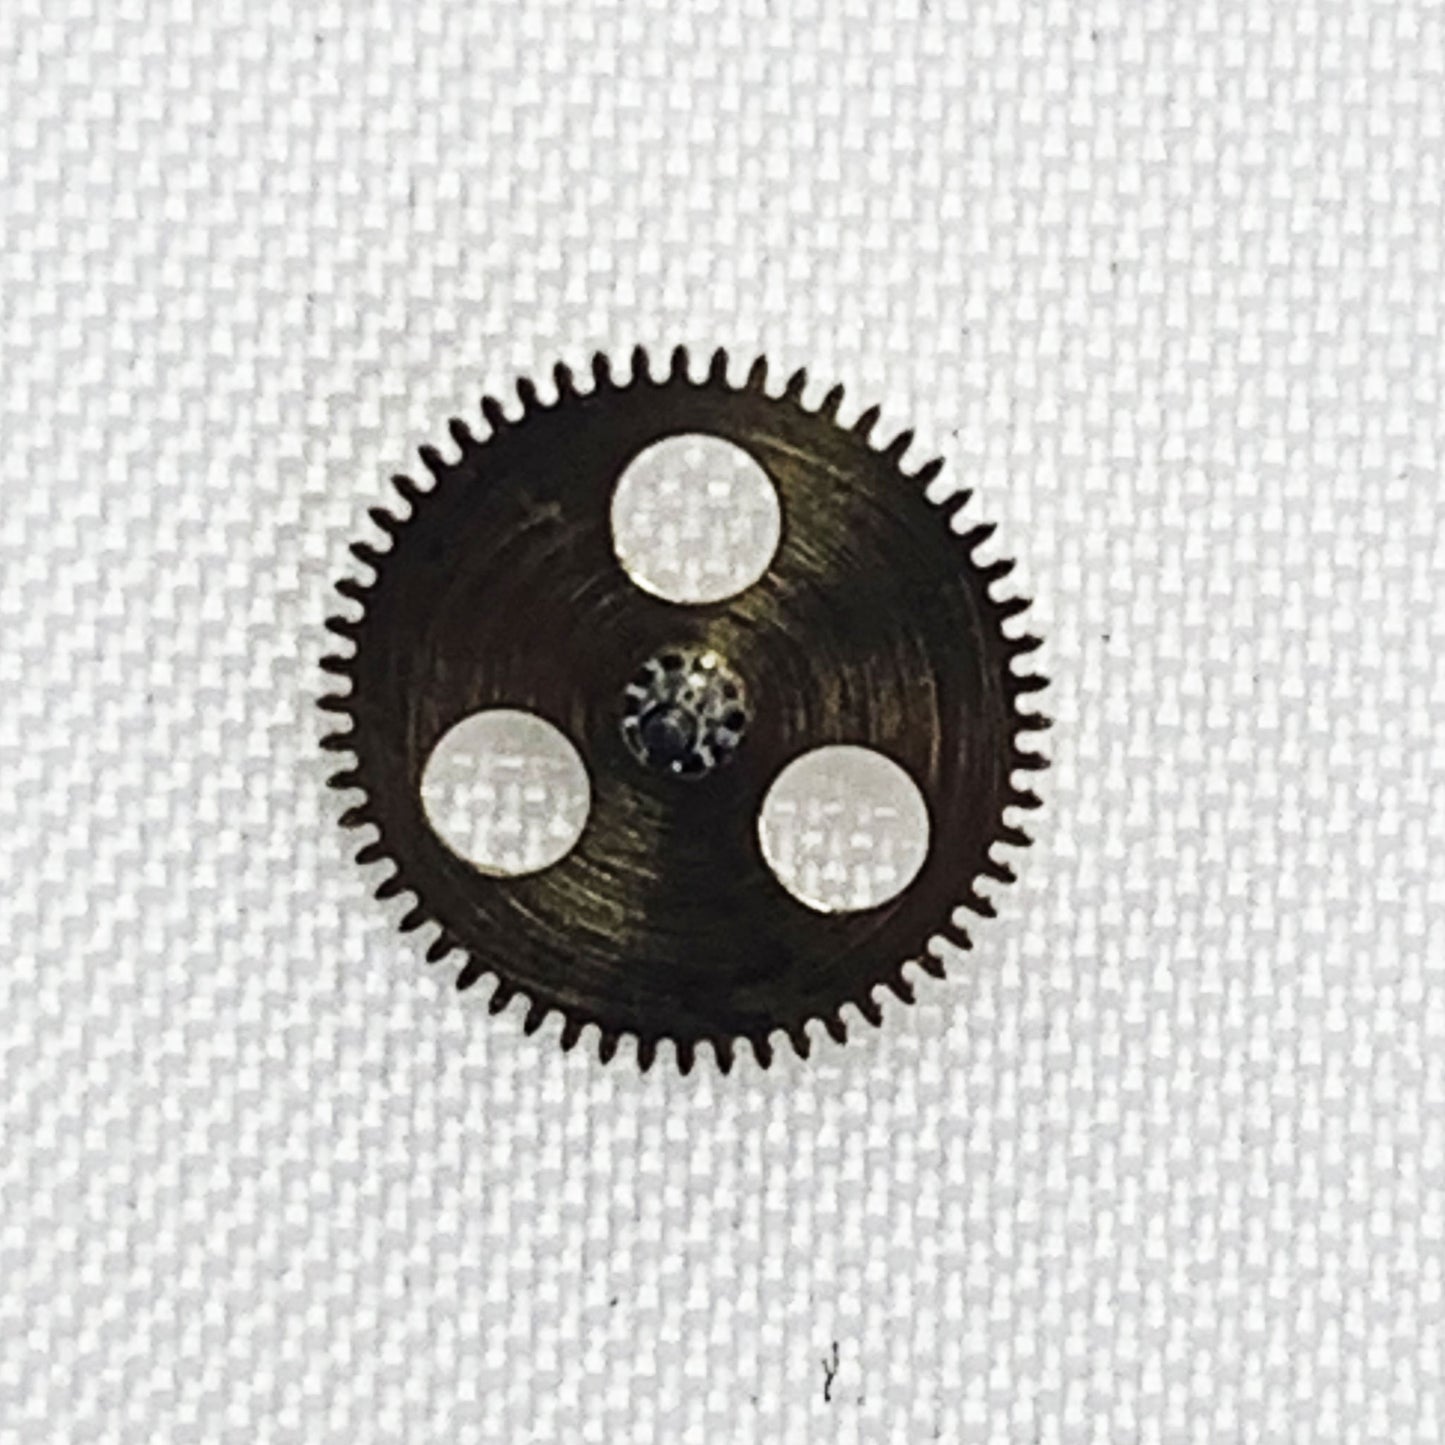 Rolex Watch Part Caliber Movement 2030 4480 Driving Wheel for Ratchet, Genuine, Used